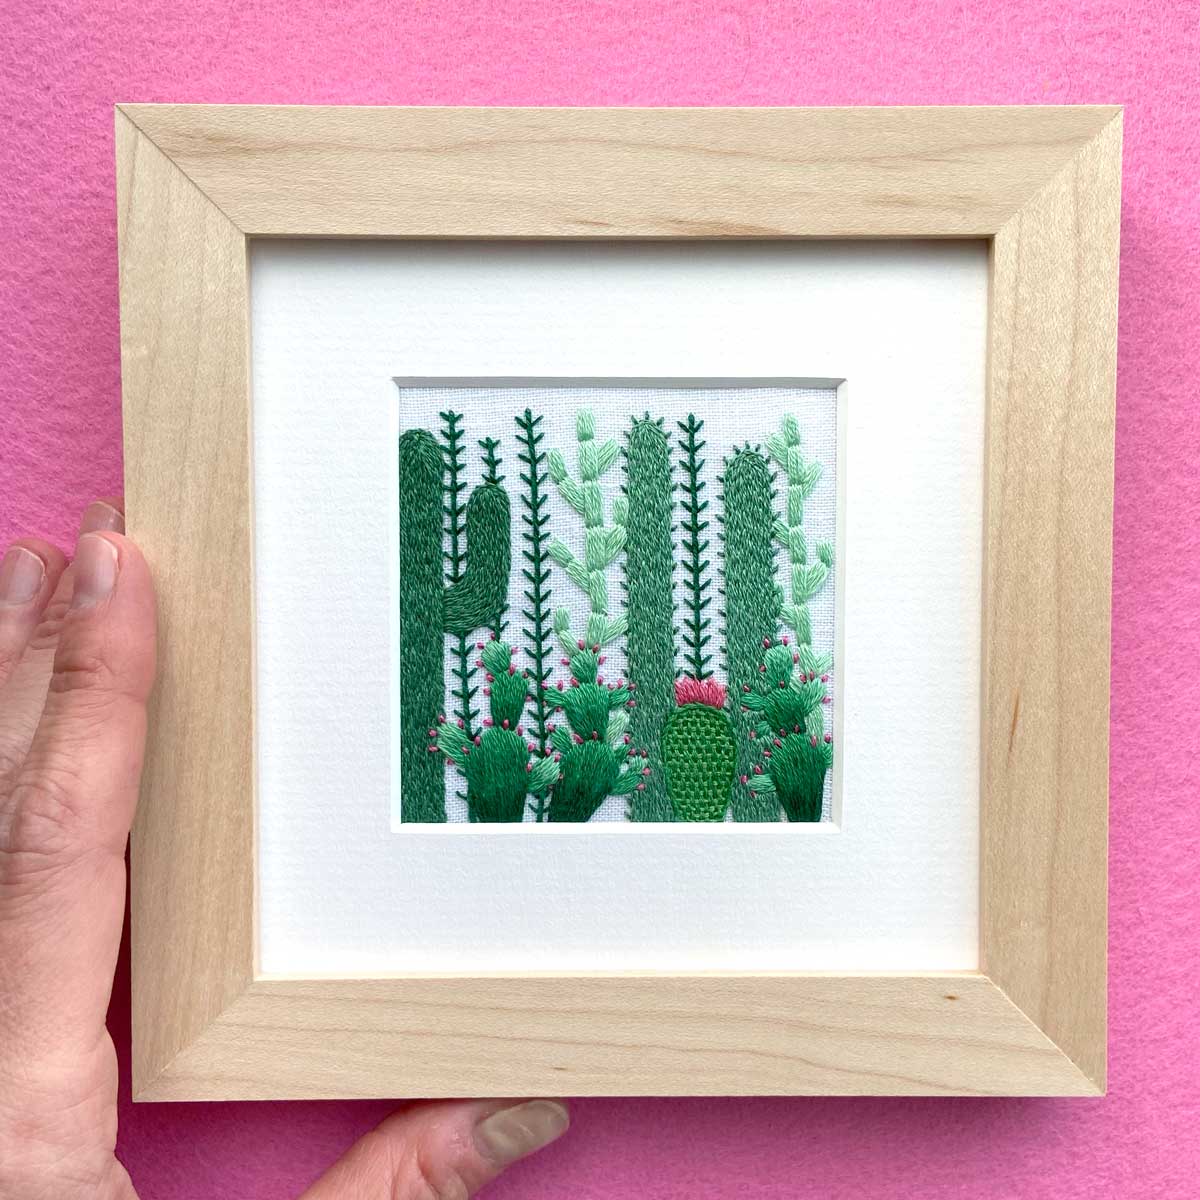 Cactus Grouping (2.75") on White Linen Hand Embroidered Art